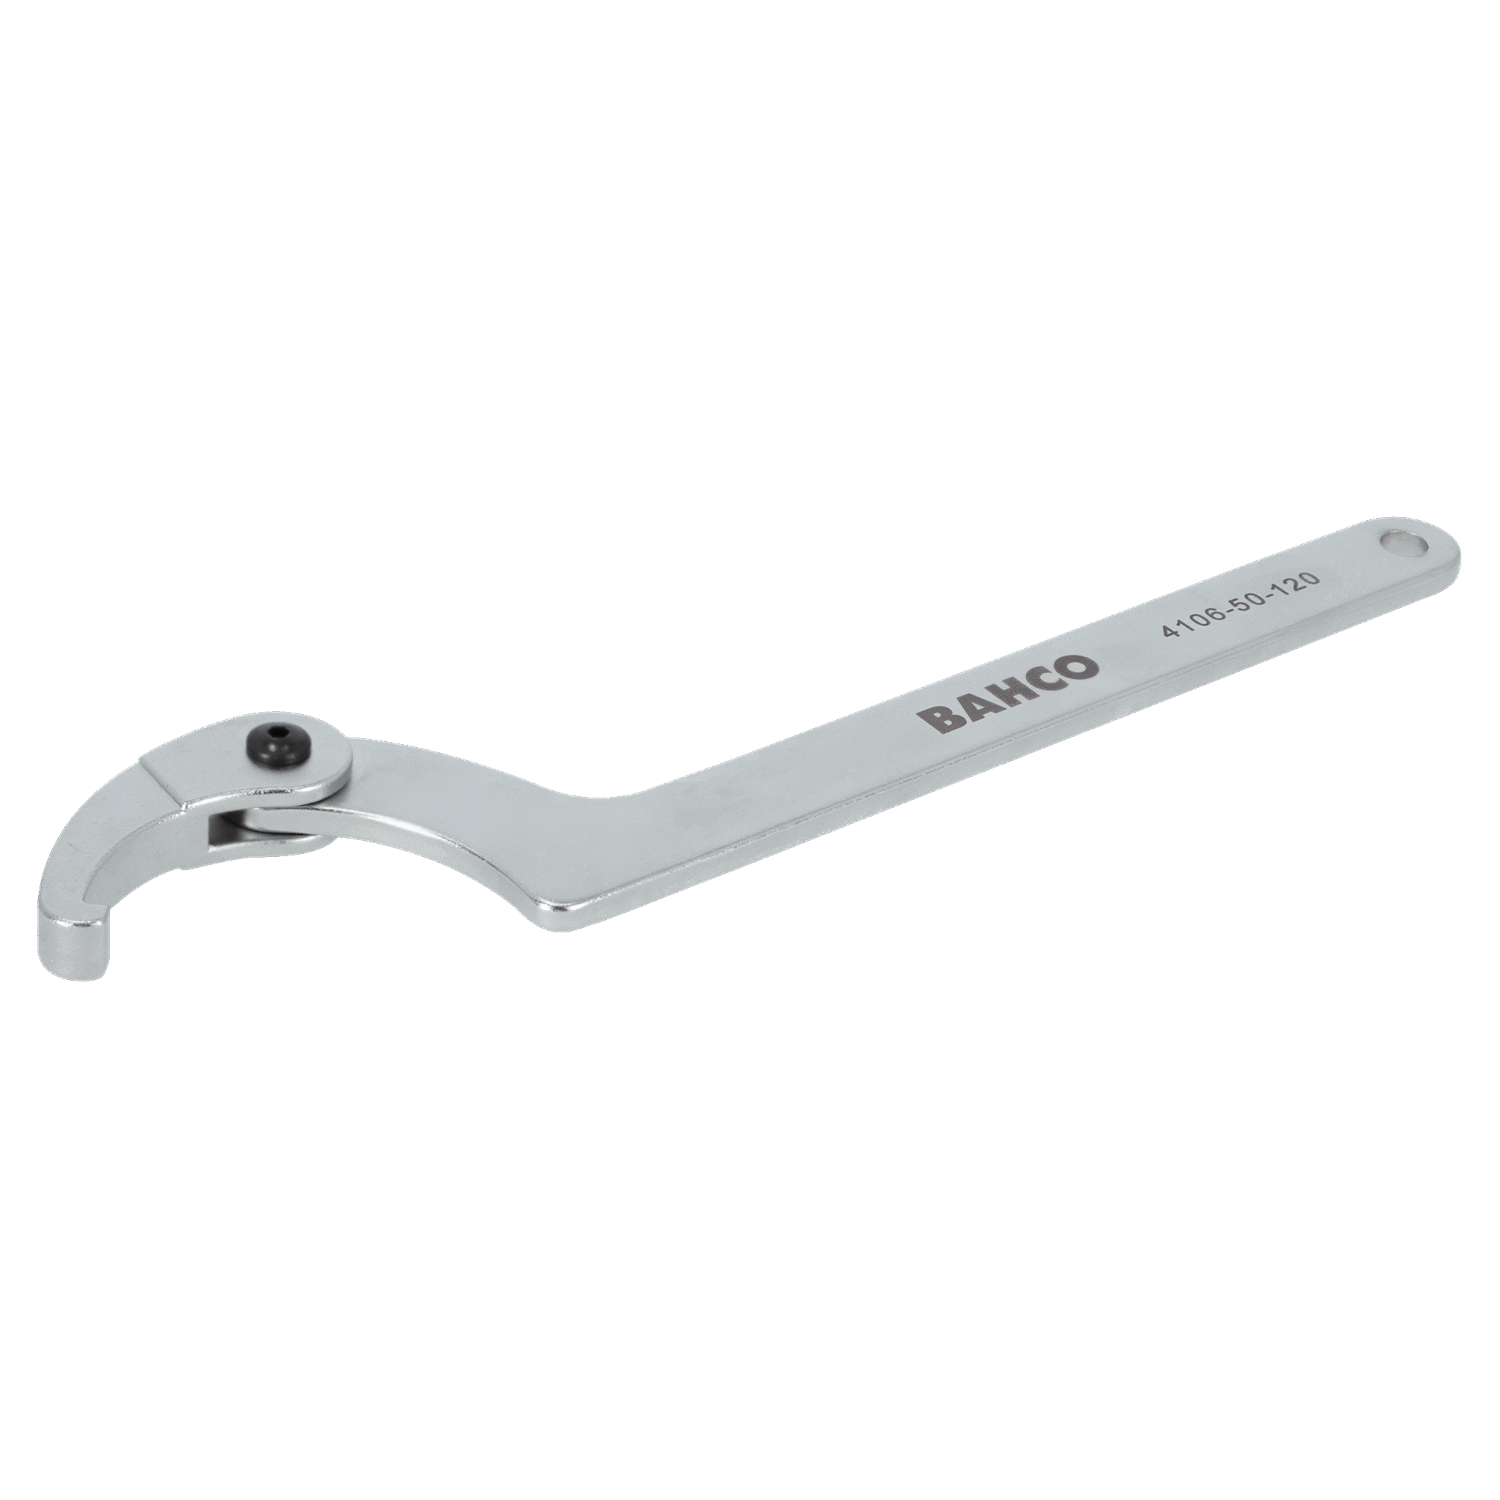 BAHCO 4106 Flexible Head Adjustable Hook Wrench Chrome Finish - Premium Hook Wrench from BAHCO - Shop now at Yew Aik.